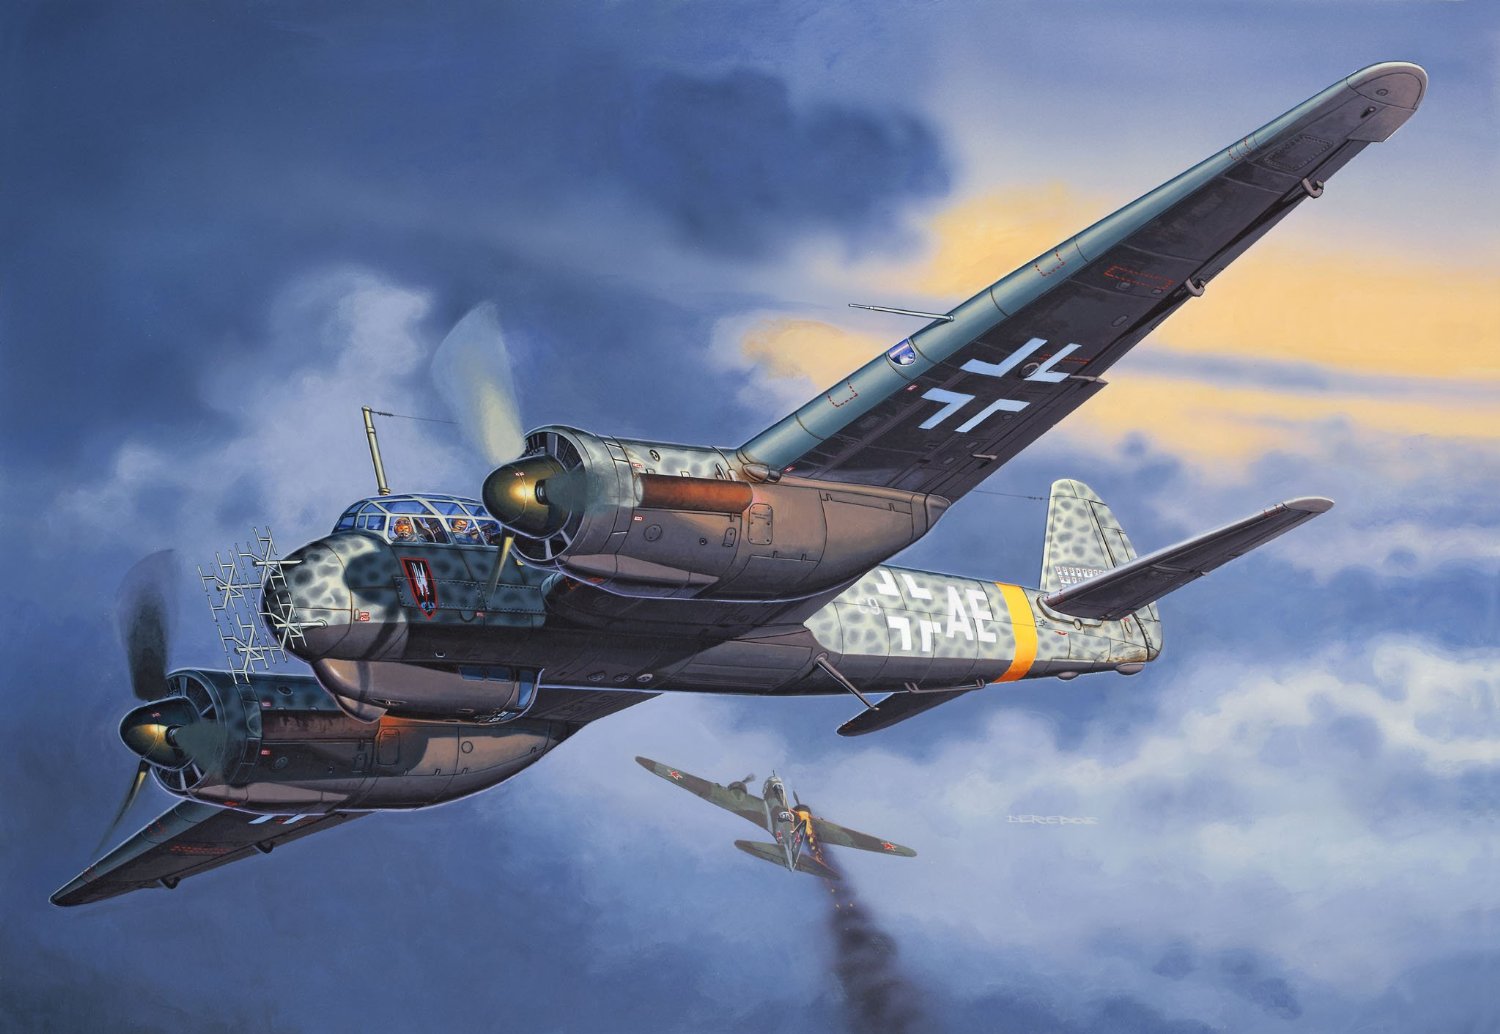 General 1500x1034 World War II military military aircraft aircraft airplane Nightfighter night Germany Luftwaffe junkers ju-88 Andrzej Deredos Boxart flying clouds Bomber Soviet Air Forces burning fire smoke